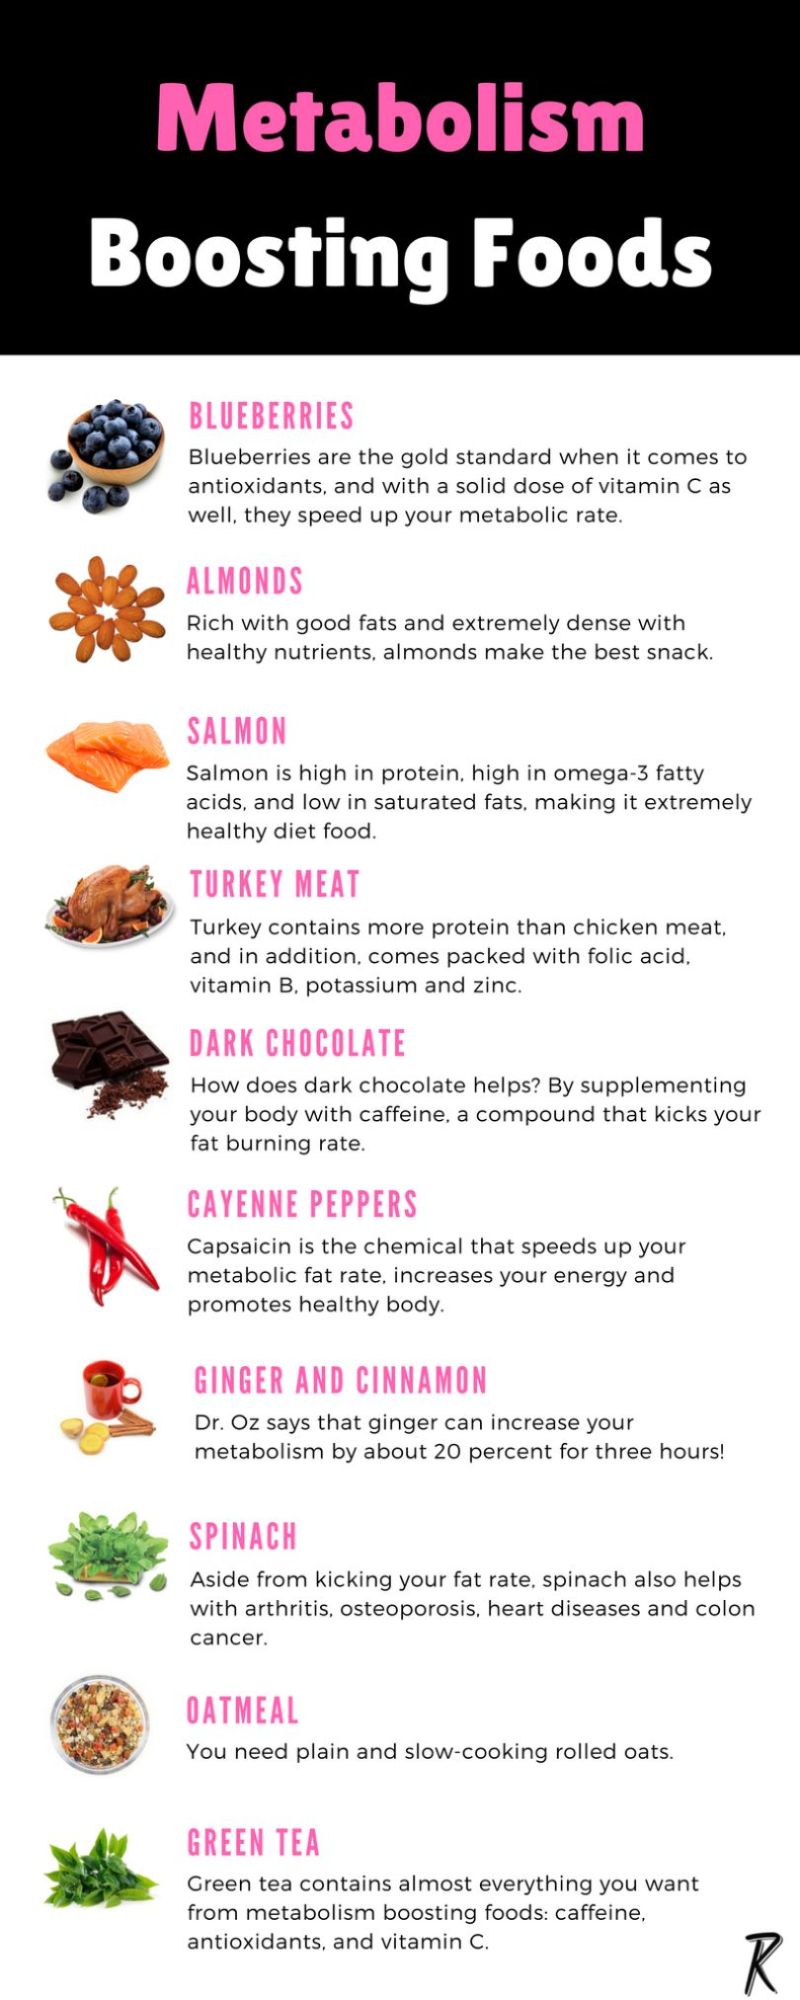 Metabolism Boosting Foods – What to Eat to Burn More Fat